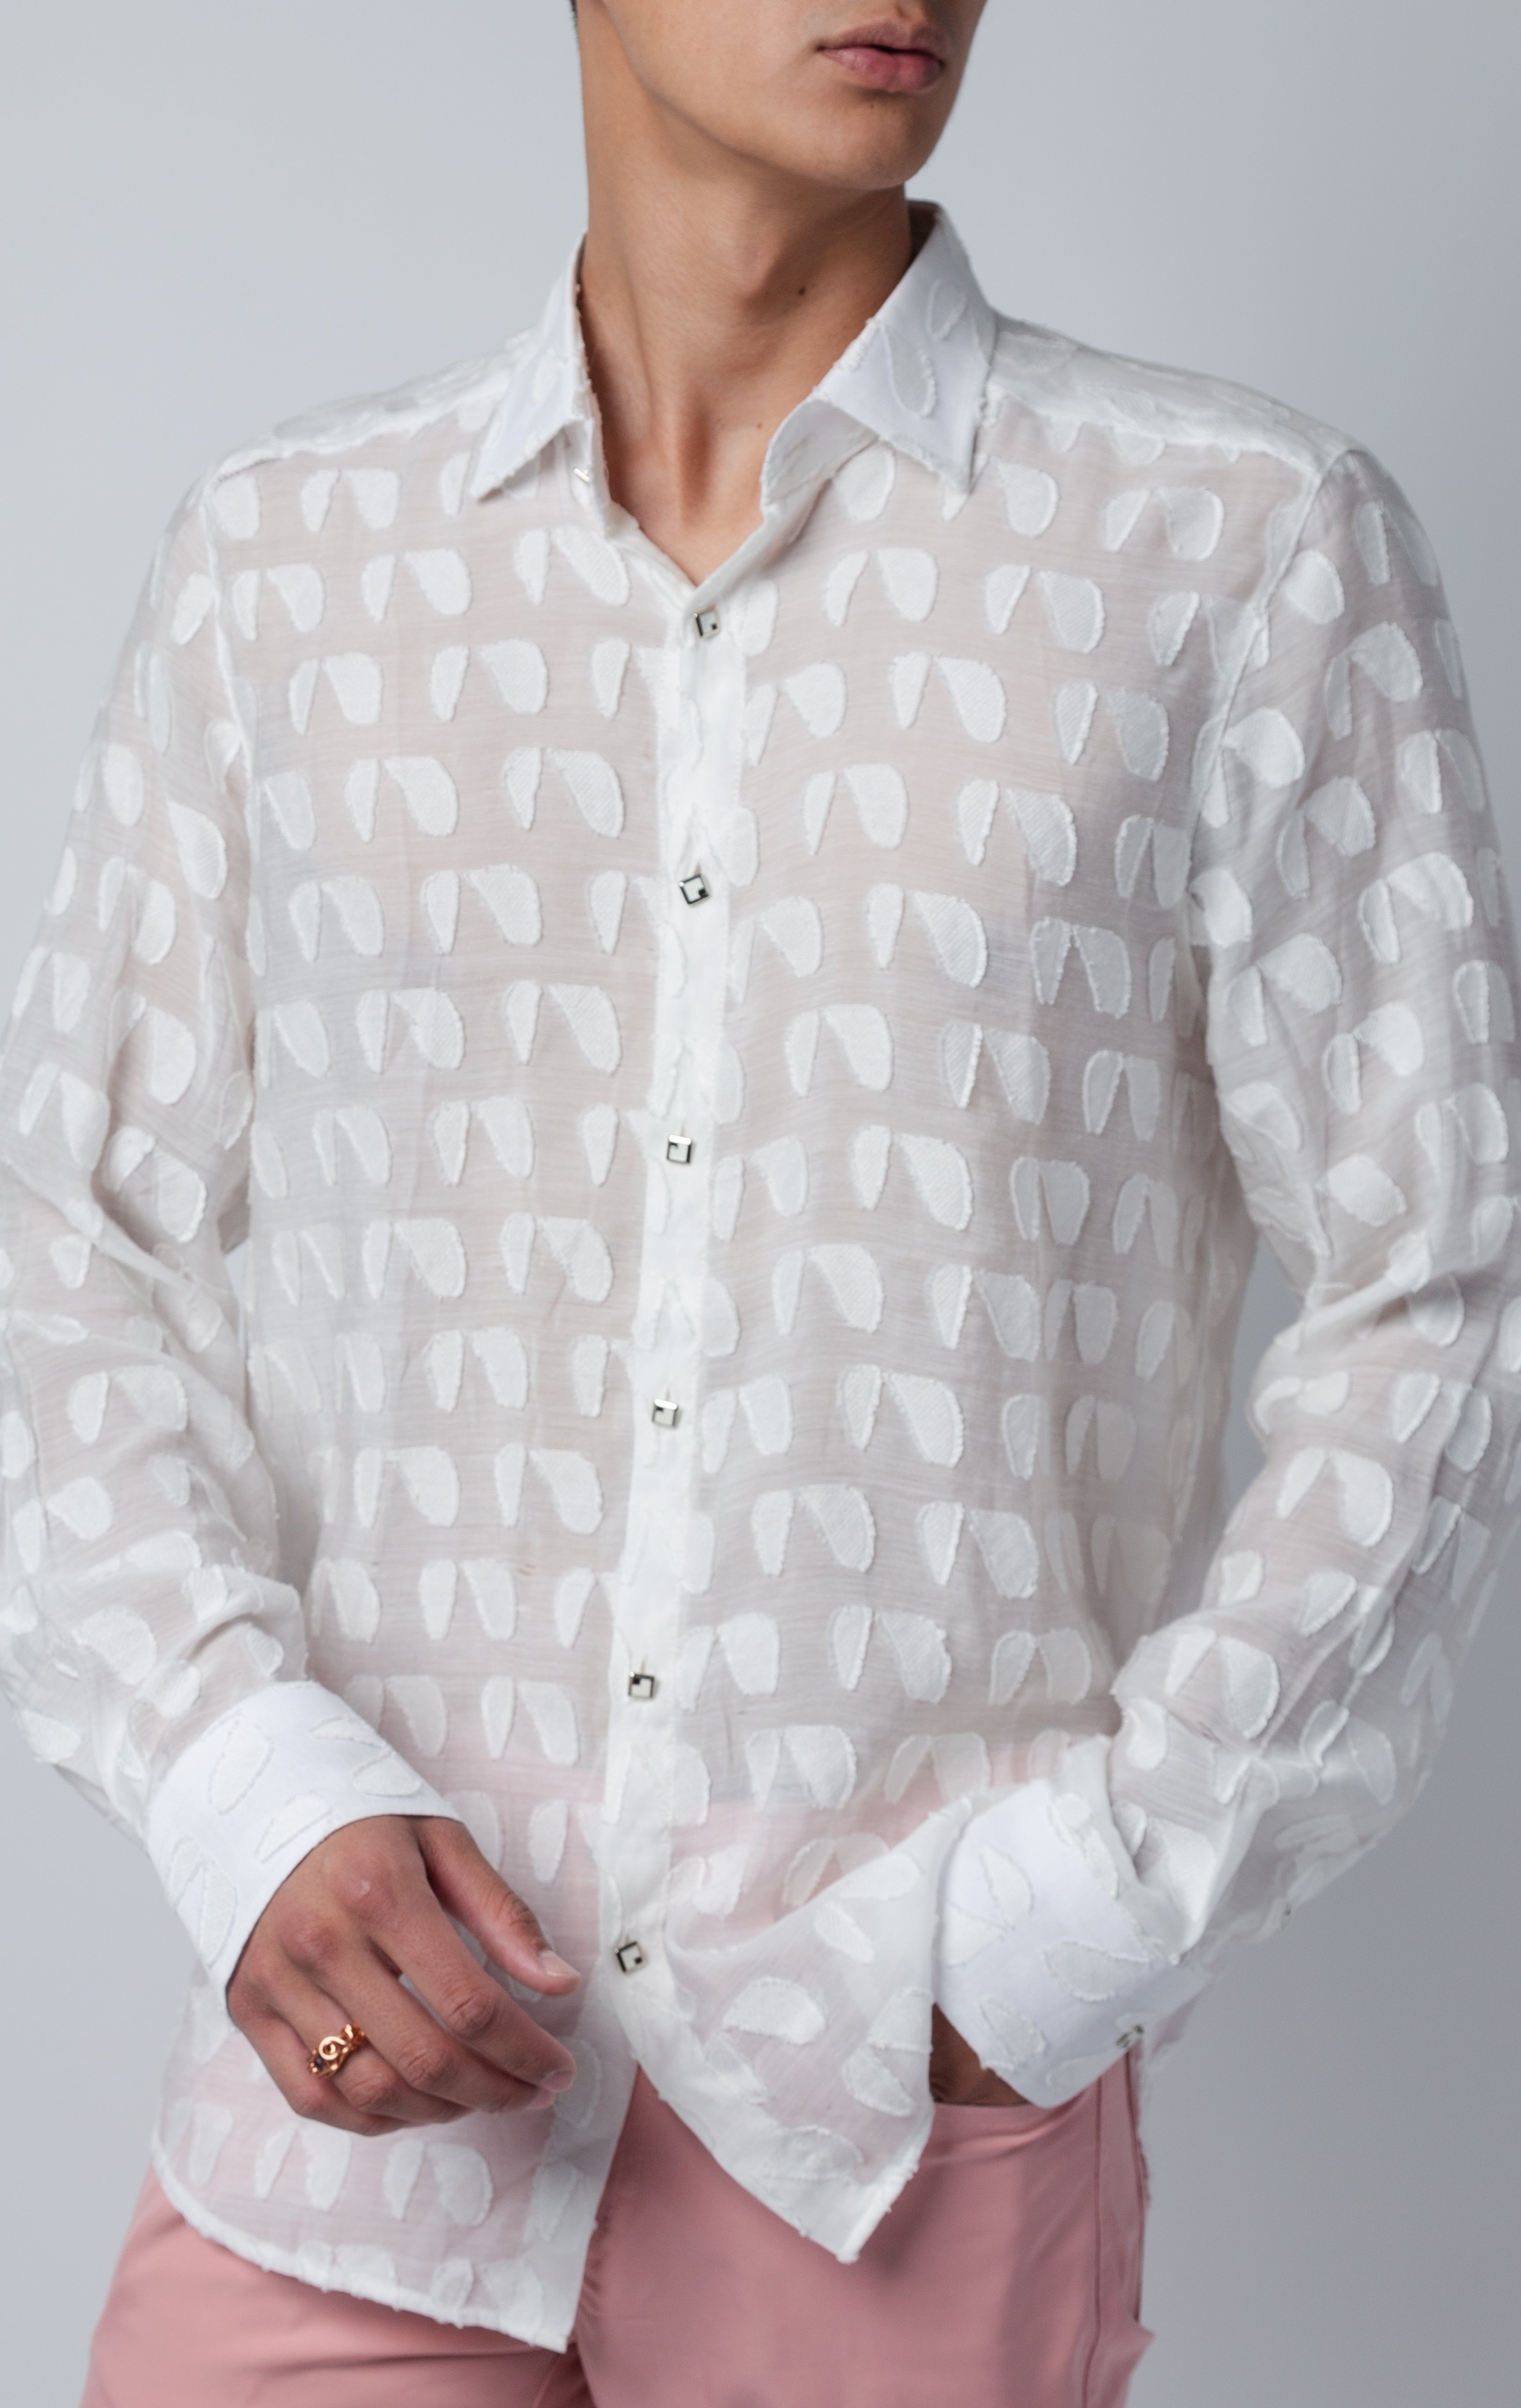 Unique long sleeve button up shirt in white